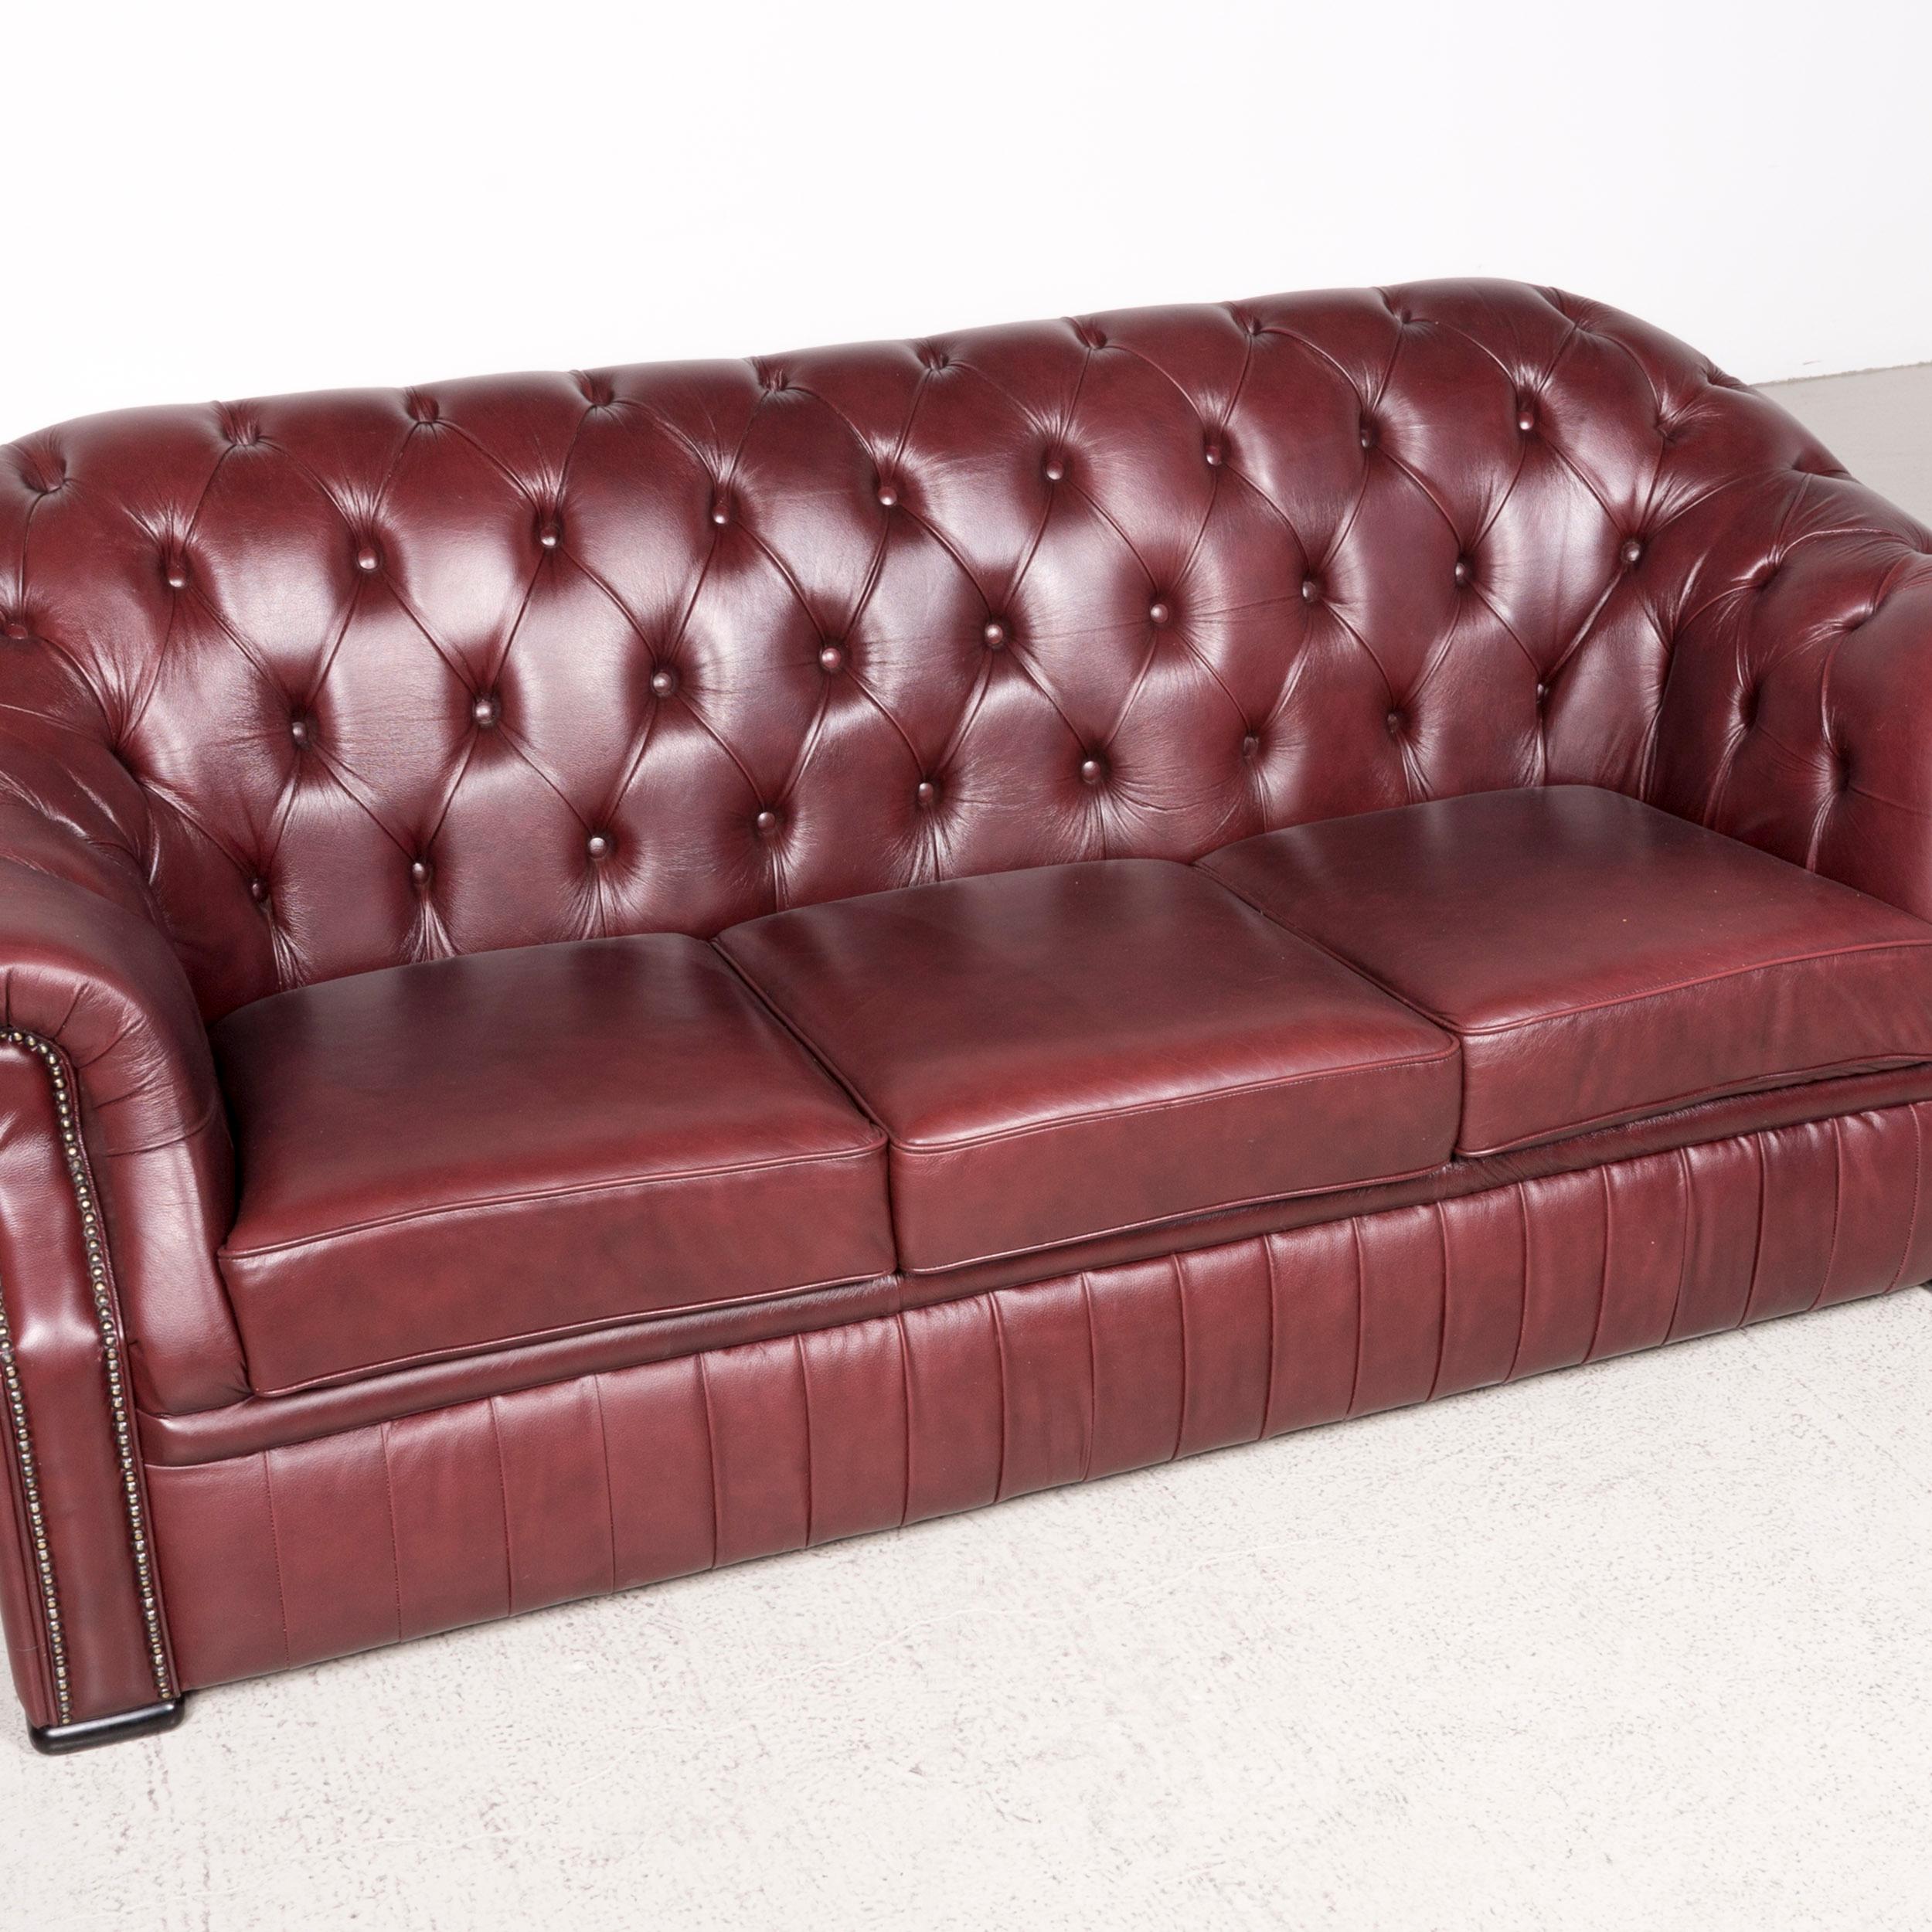 3 seater genuine leather couch